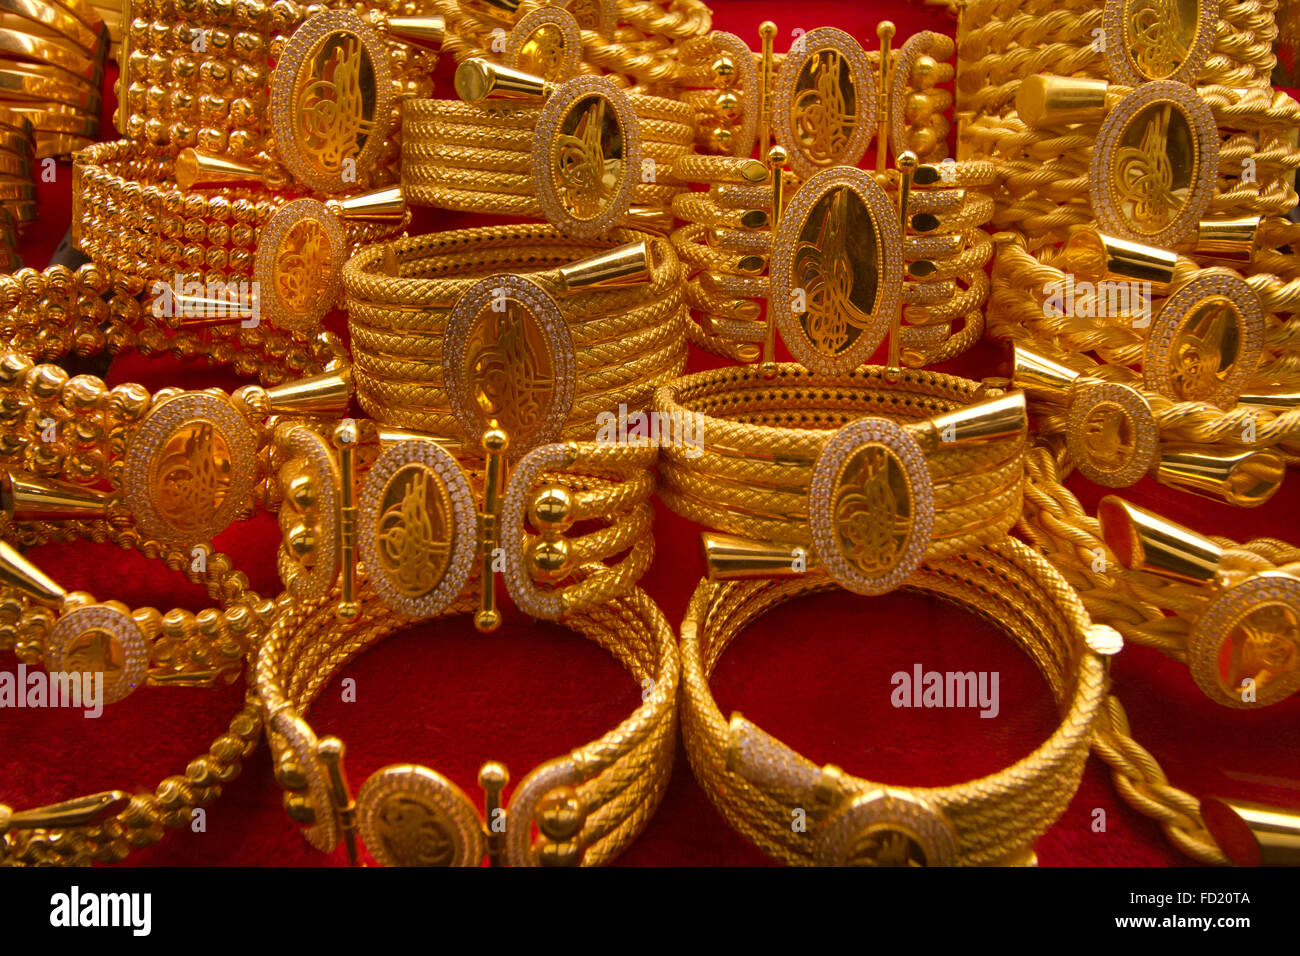 Arap gold - Identical displays can be seen in gold souqs in all the Arab Gulf States Stock Photo